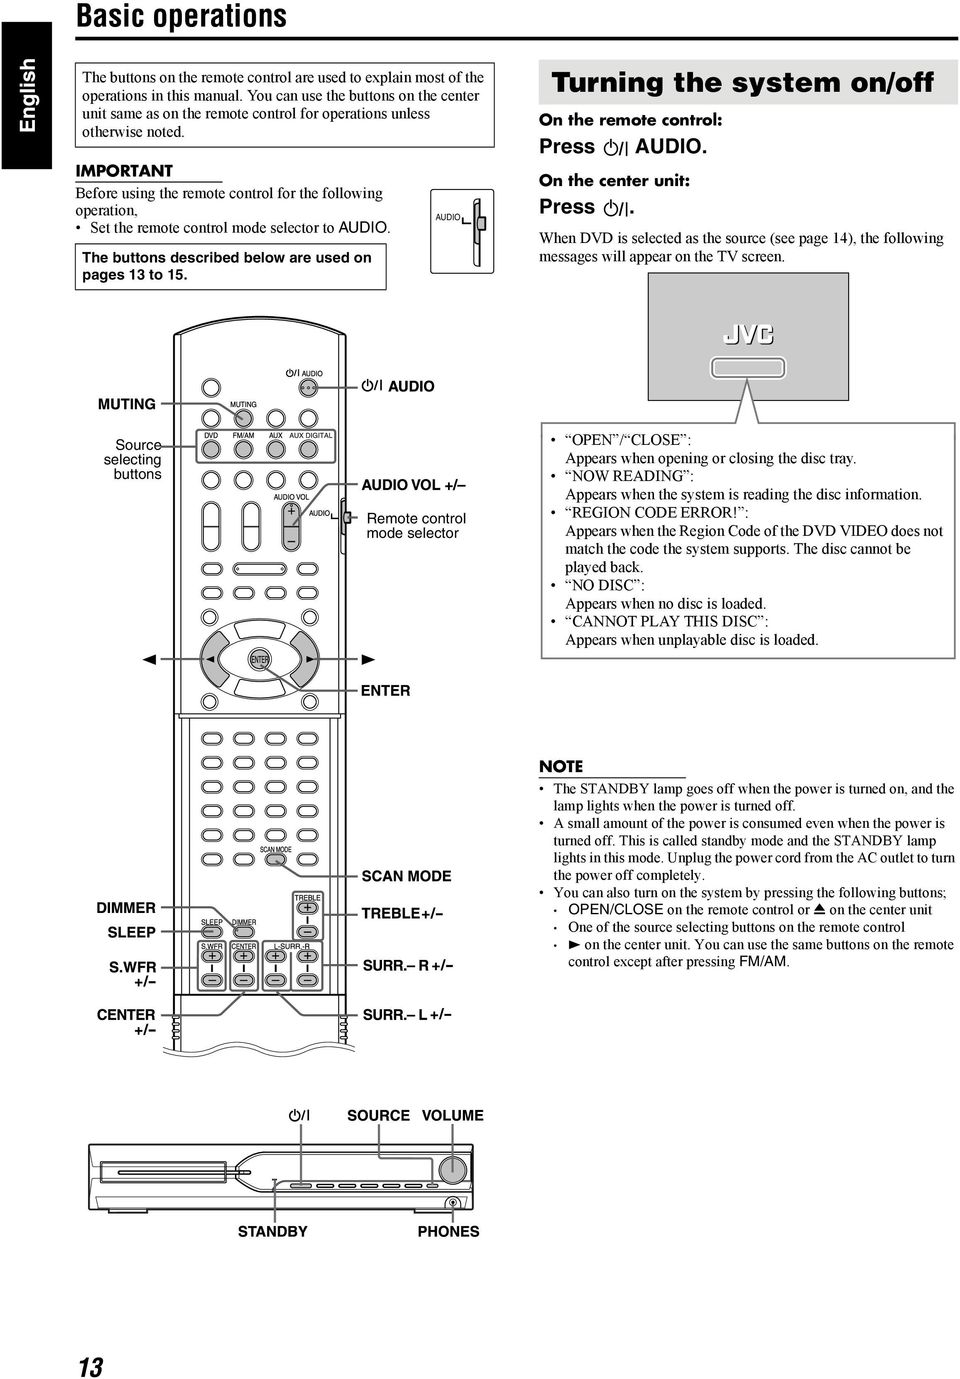 IMPORTANT Before using the remote control for the following operation, Set the remote control mode selector to AUDIO. The buttons described below are used on pages 13 to 15.